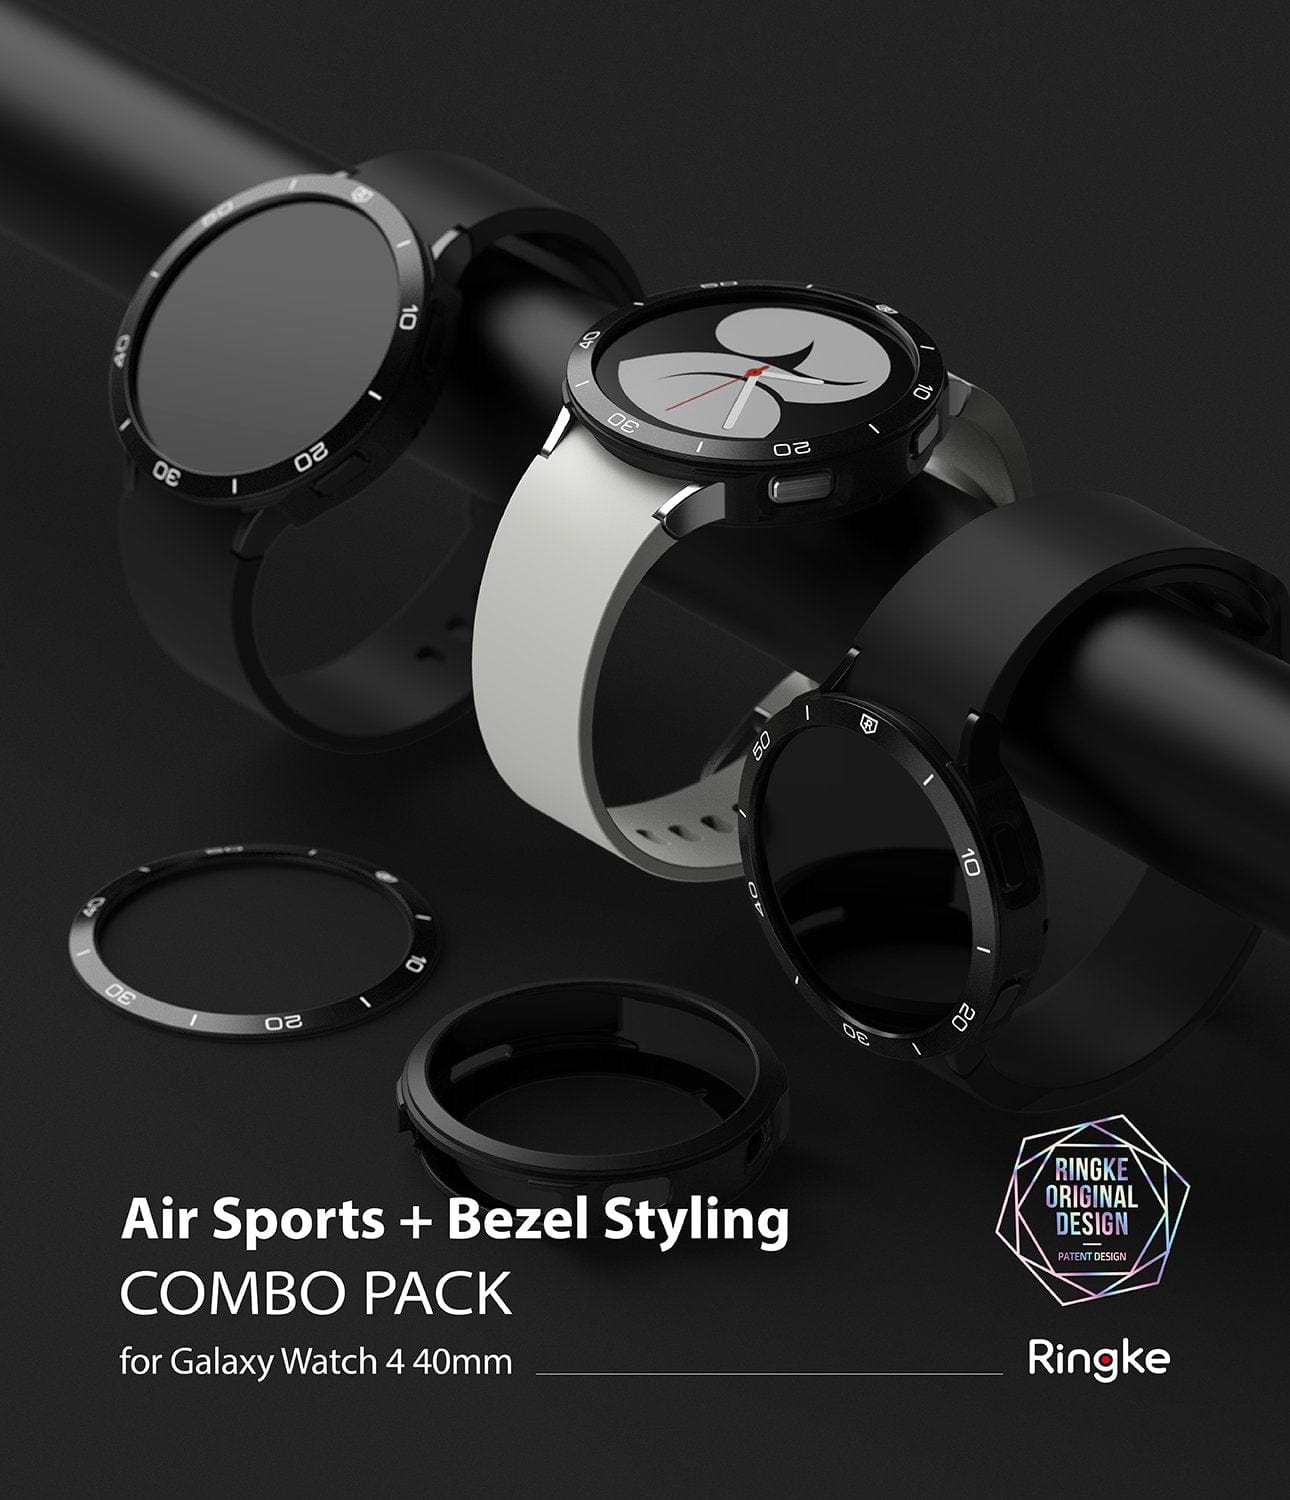 The Ringke Air Sports + Bezel Styling Combo Pack is specifically designed to perfectly fit the Galaxy Watch 4 40mm model for seamless compatibility.